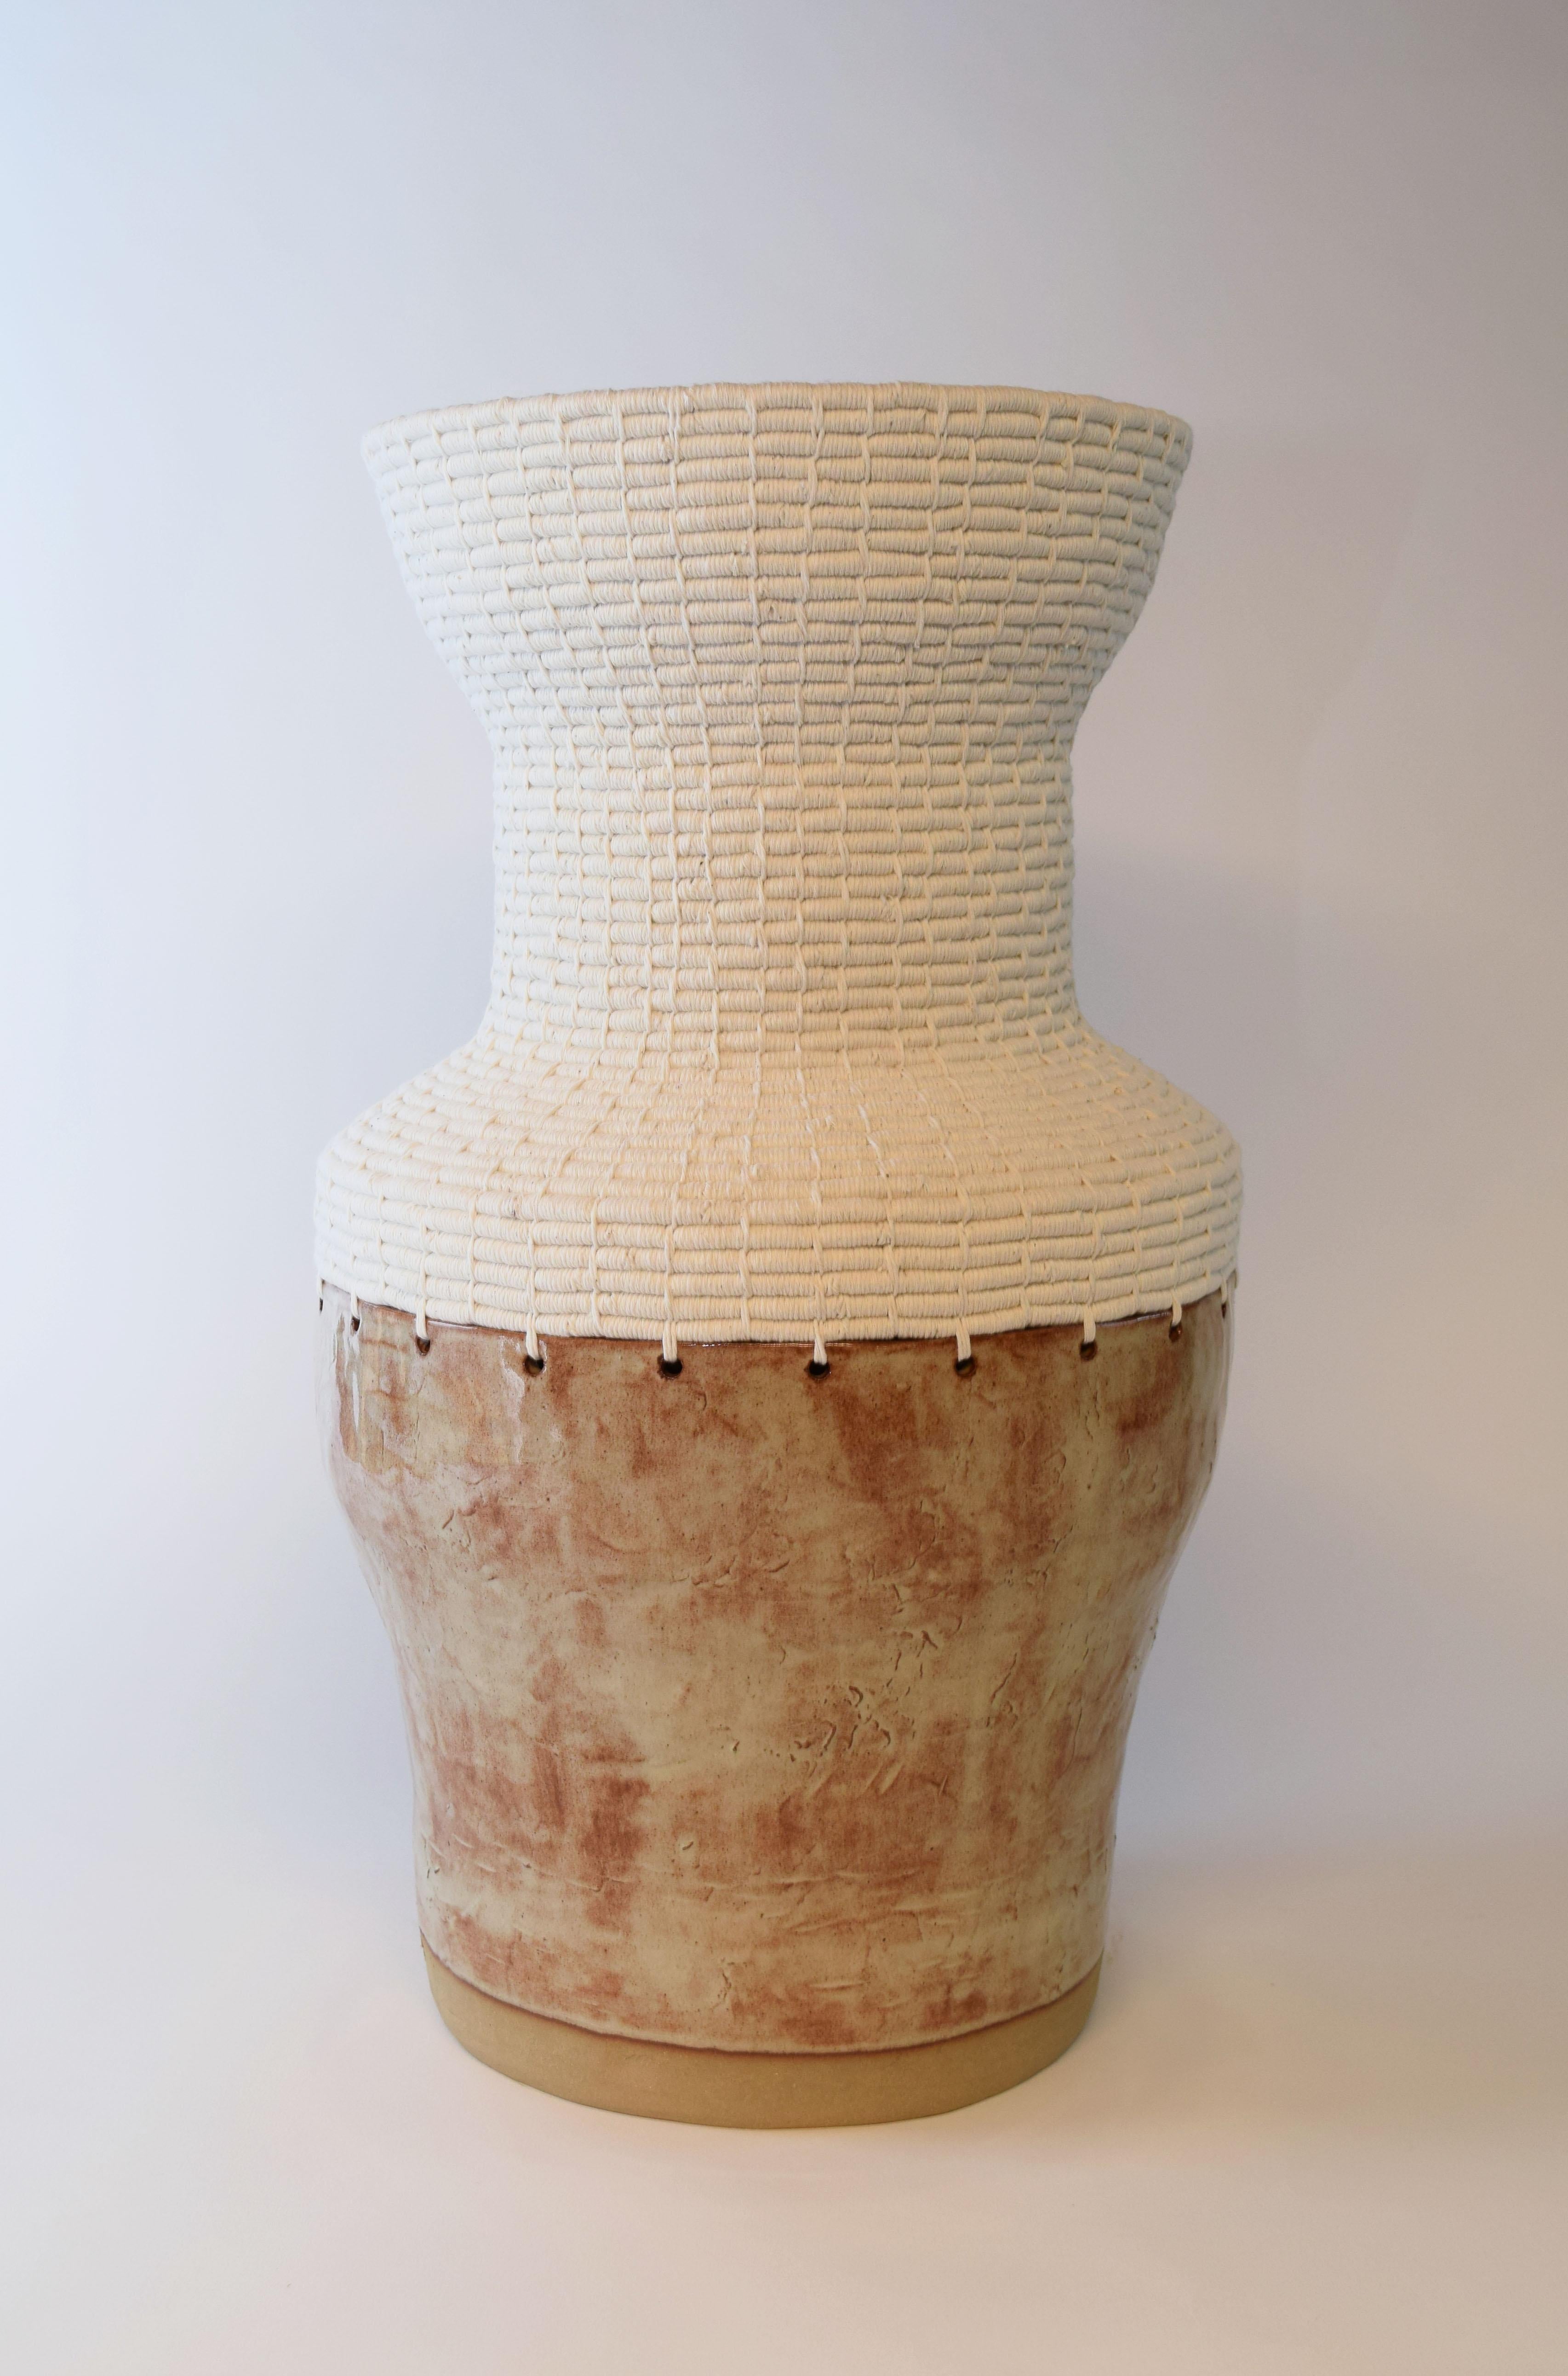 White Natural vessel by Karen Gayle Tinney
Dimensions: D 25.5 x W 25.5 x H 50 cm 
Material: Stoneware with cream, shino glaze, white cotton.

Karen Gayle Tinney is an artist and designer whose work consists of pieces that combine ceramic and